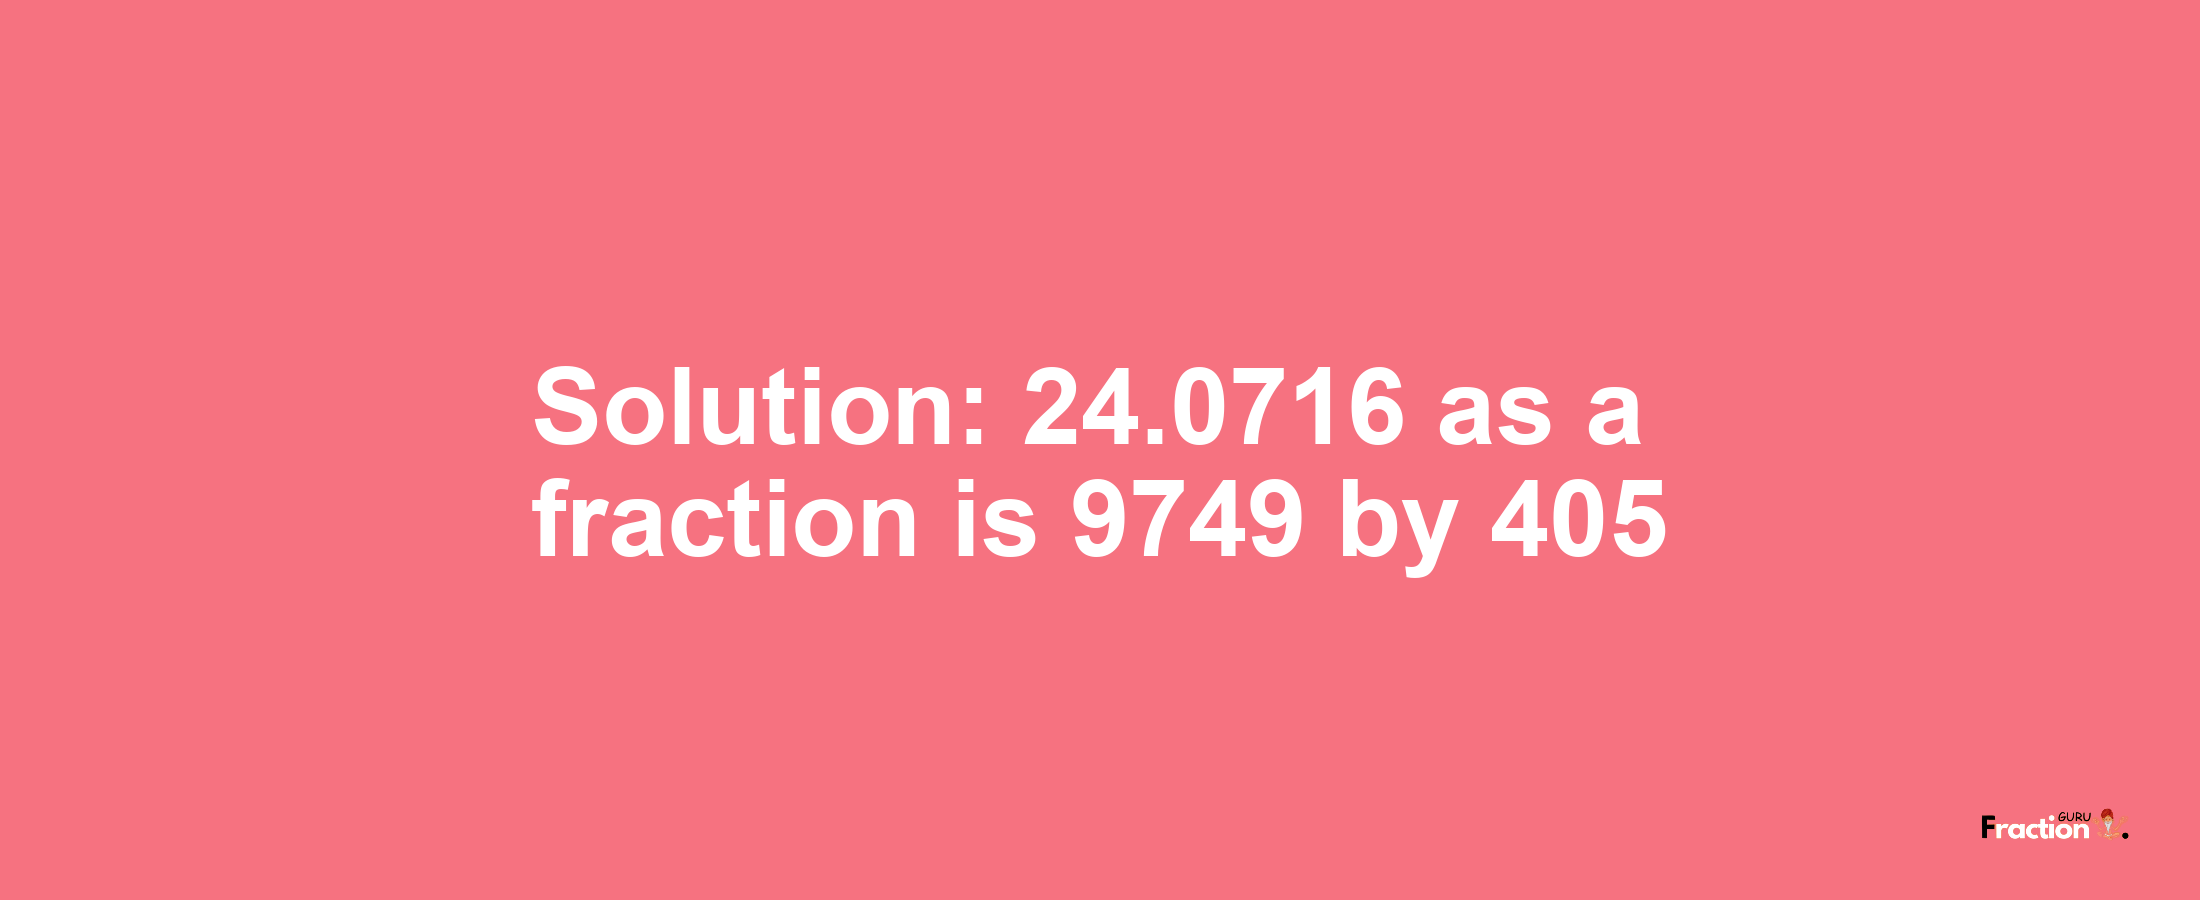 Solution:24.0716 as a fraction is 9749/405